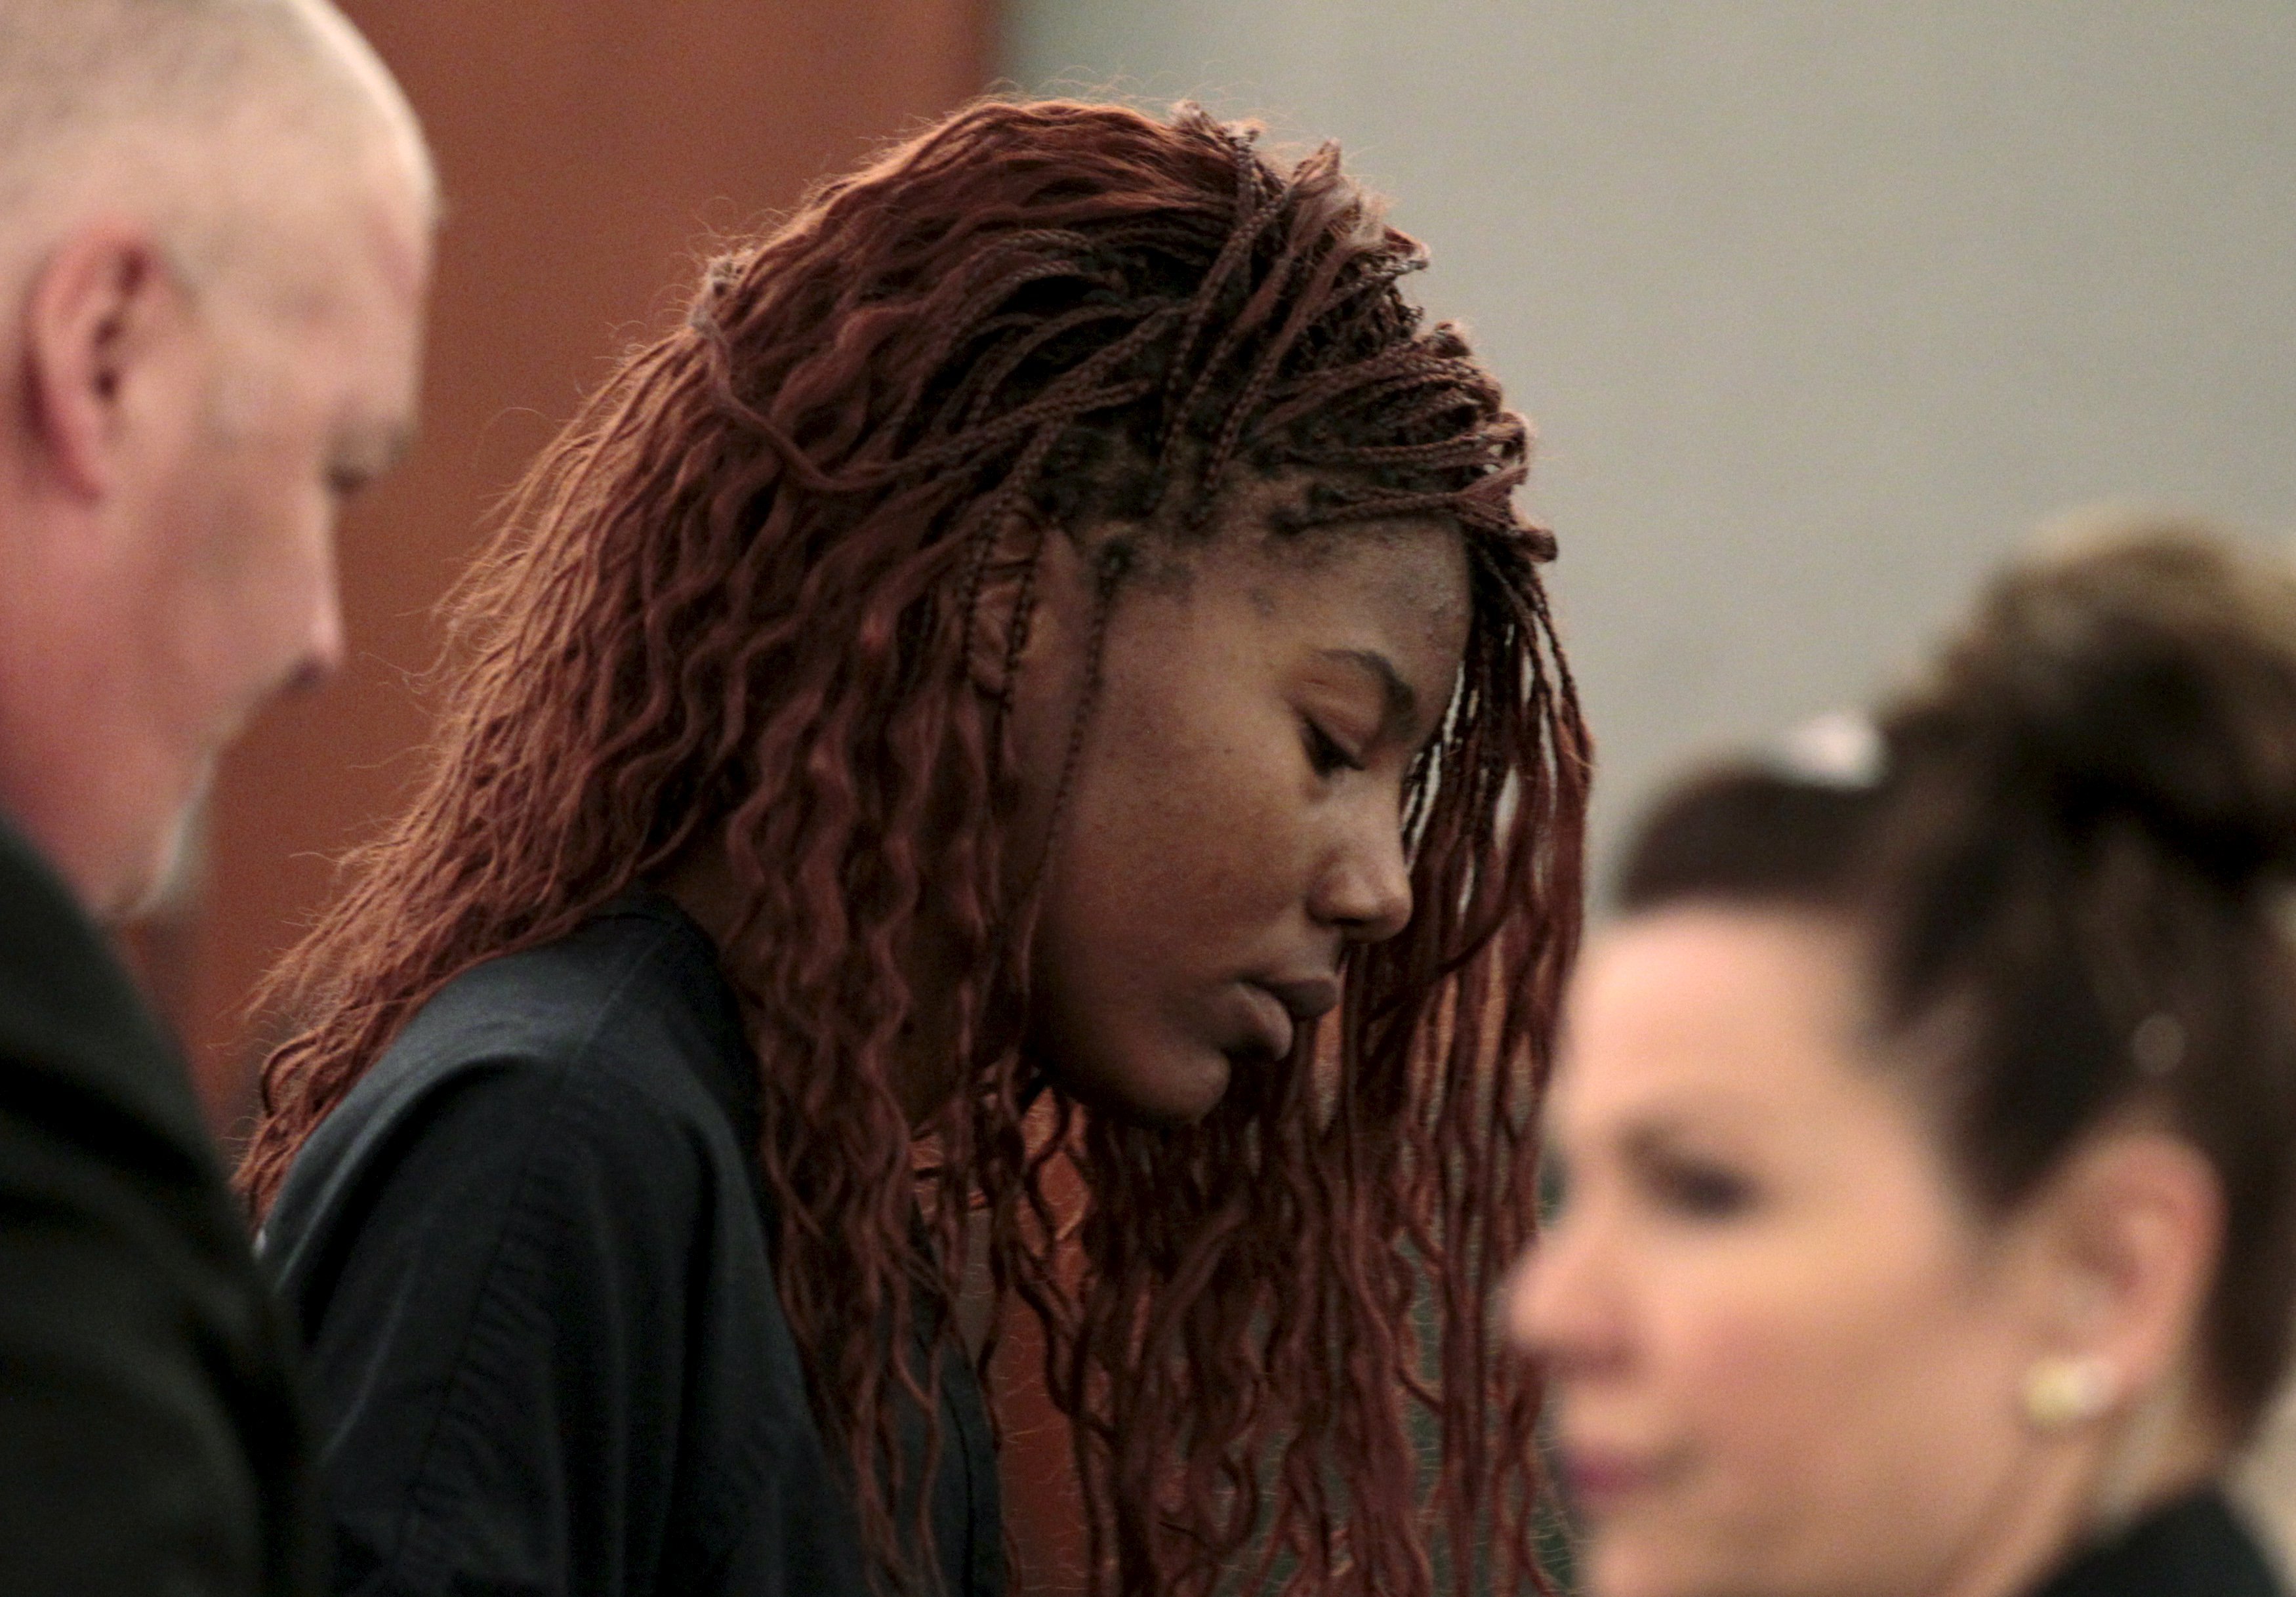 Lakeisha Nicole Holloway, 24, of Oregon, leaves the courtroom after her initial appearance at the Regional Justice Center in Las Vegas, Dec. 23, 2015. (Steve Marcus—Reuters)